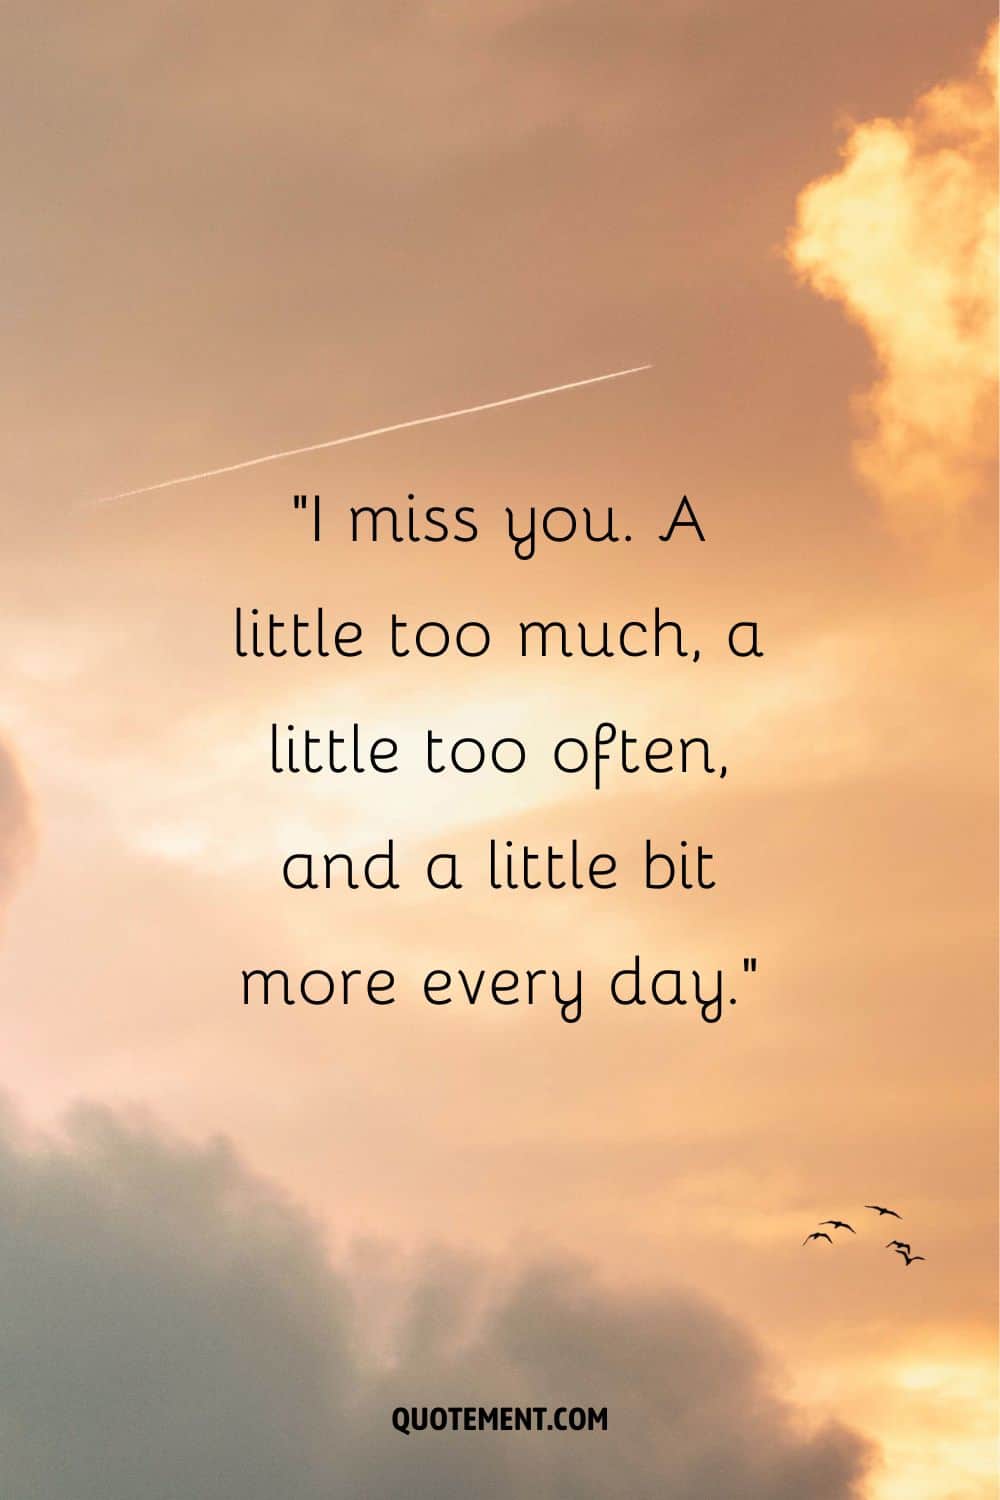 I miss you. A little too much, a little too often, and a little bit more every day.